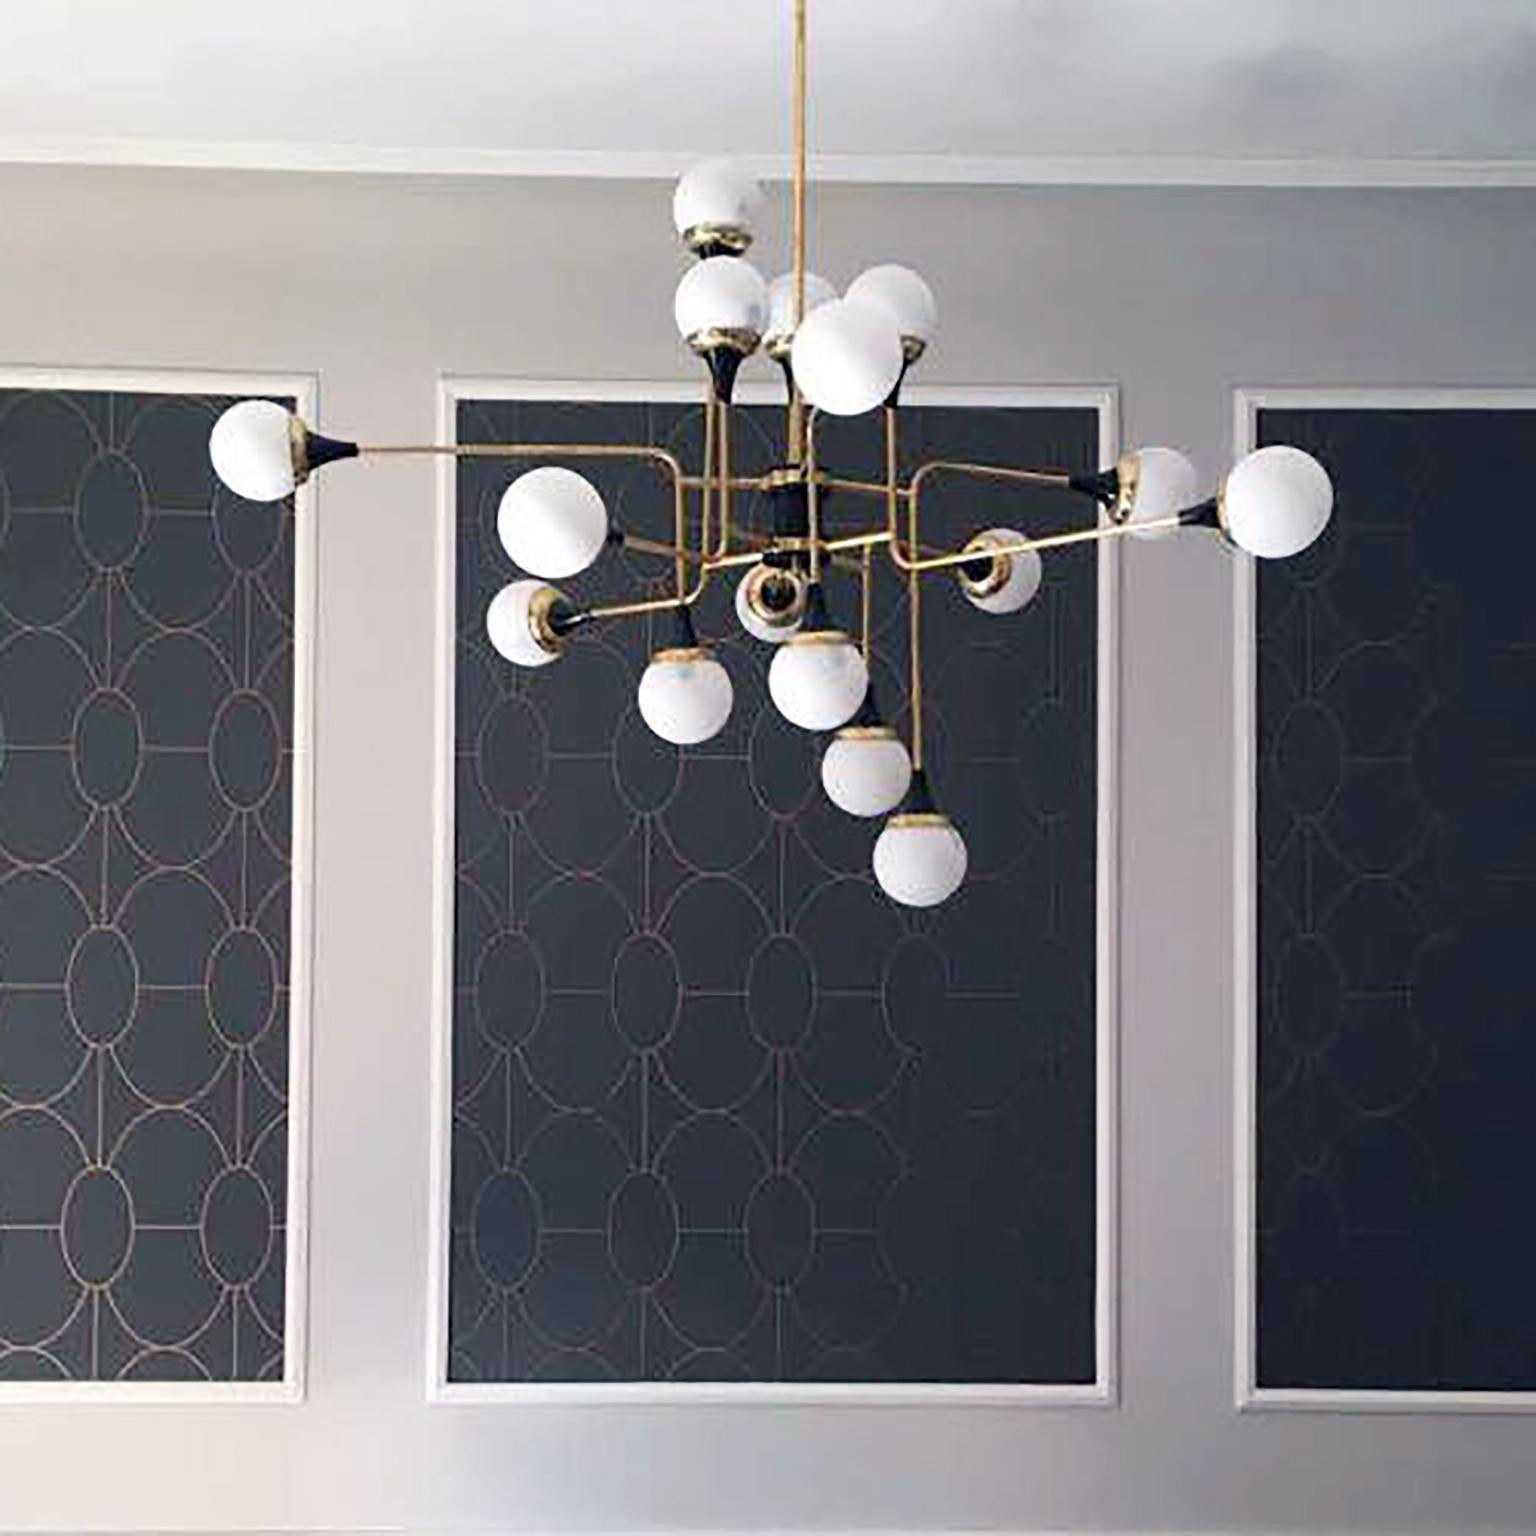 Marvelous Italian chandelier with 16 lights, made after a 1959 Stilnovo design.
Black painted metal, brass and opaline glass shades. 

Dimensions:
115 x 115 cm. (45 x 45 In.)
Height adjustable upon request.